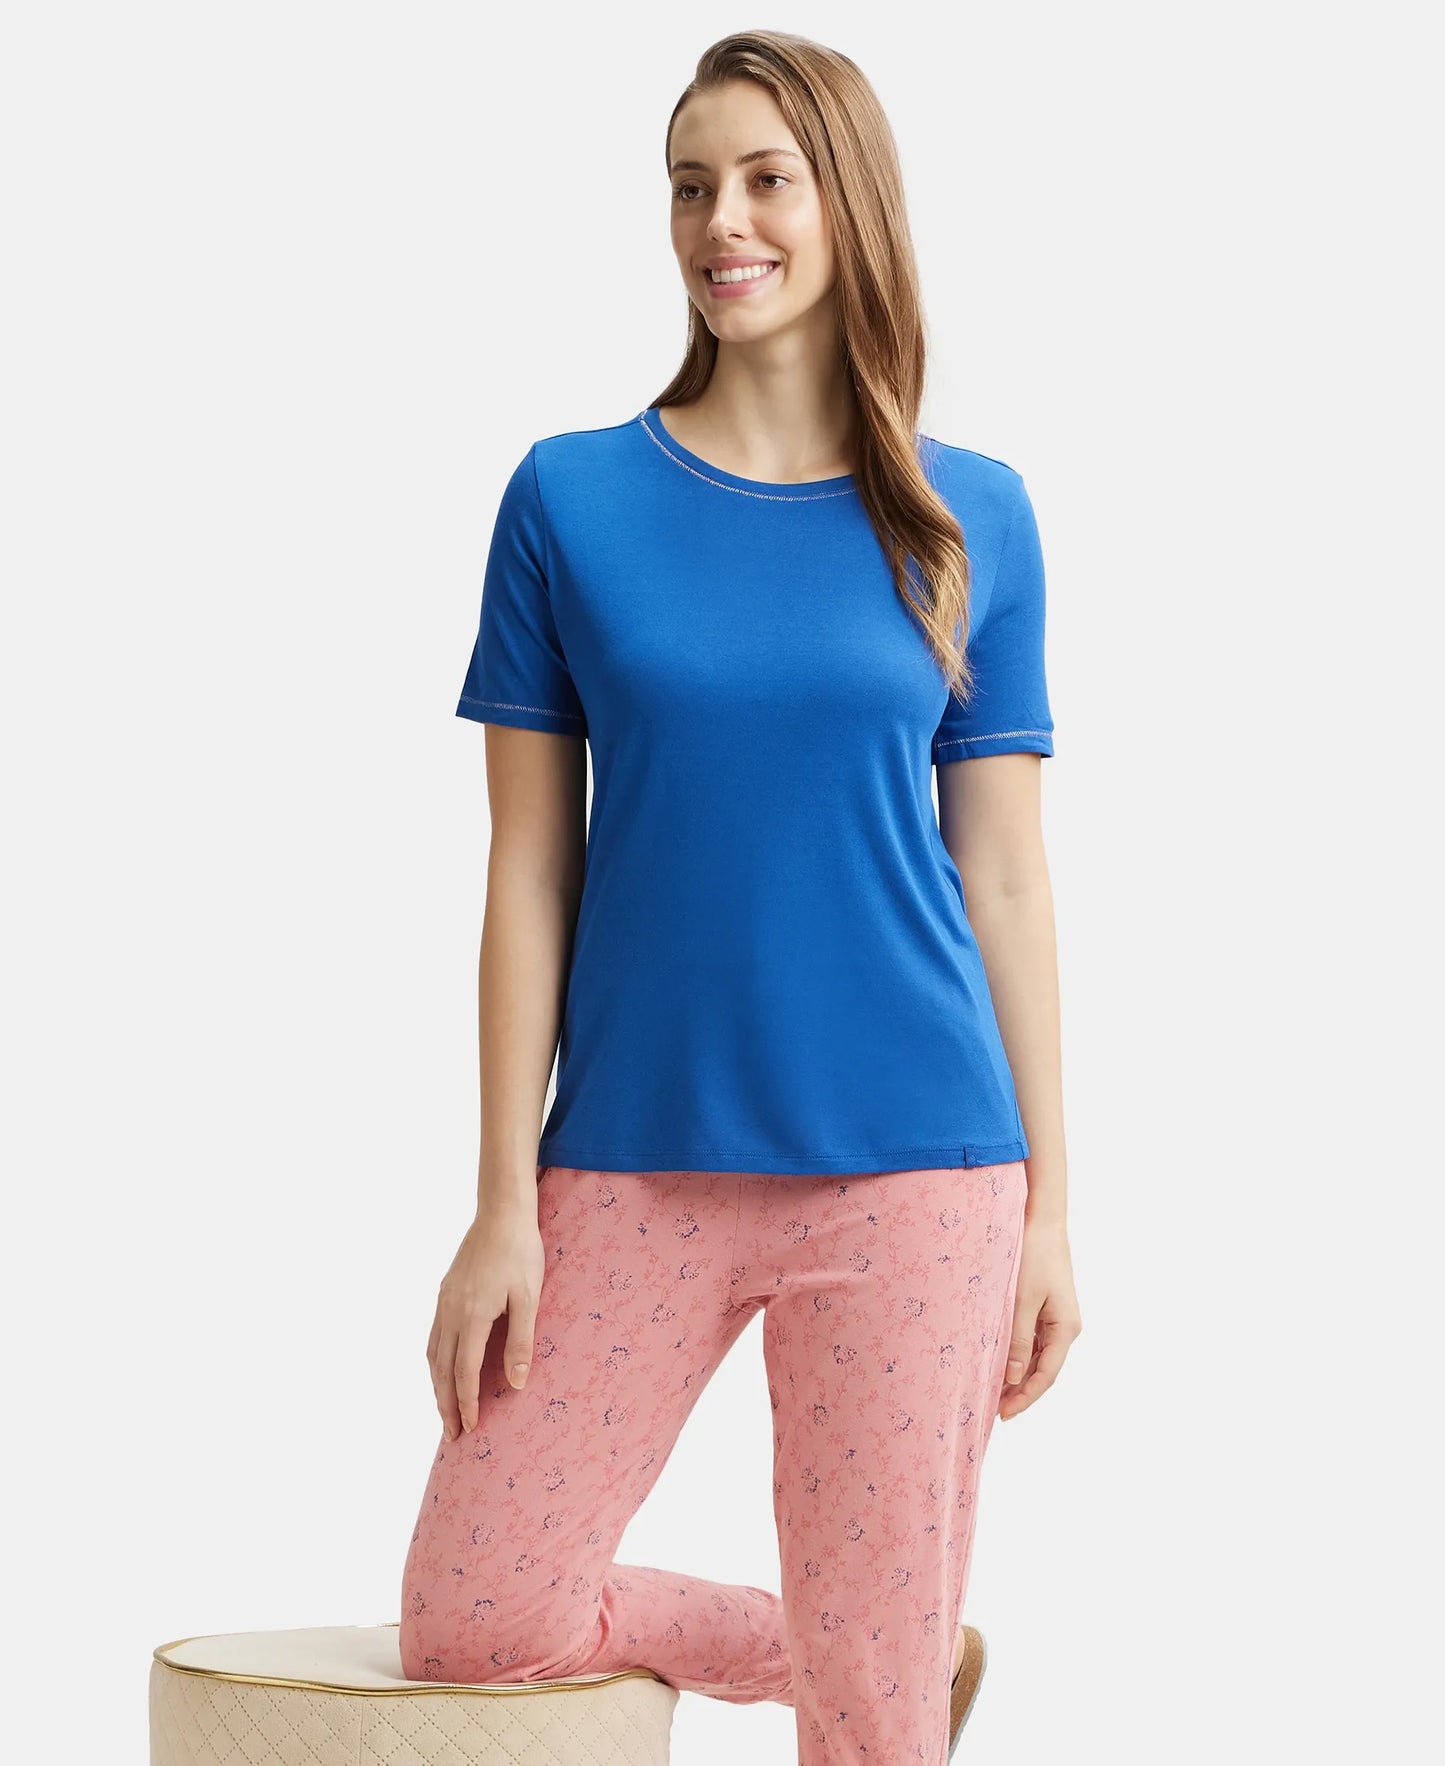 Micro Modal Cotton Relaxed Fit Round neck Half Sleeve T-Shirt - Blue Quartz-6